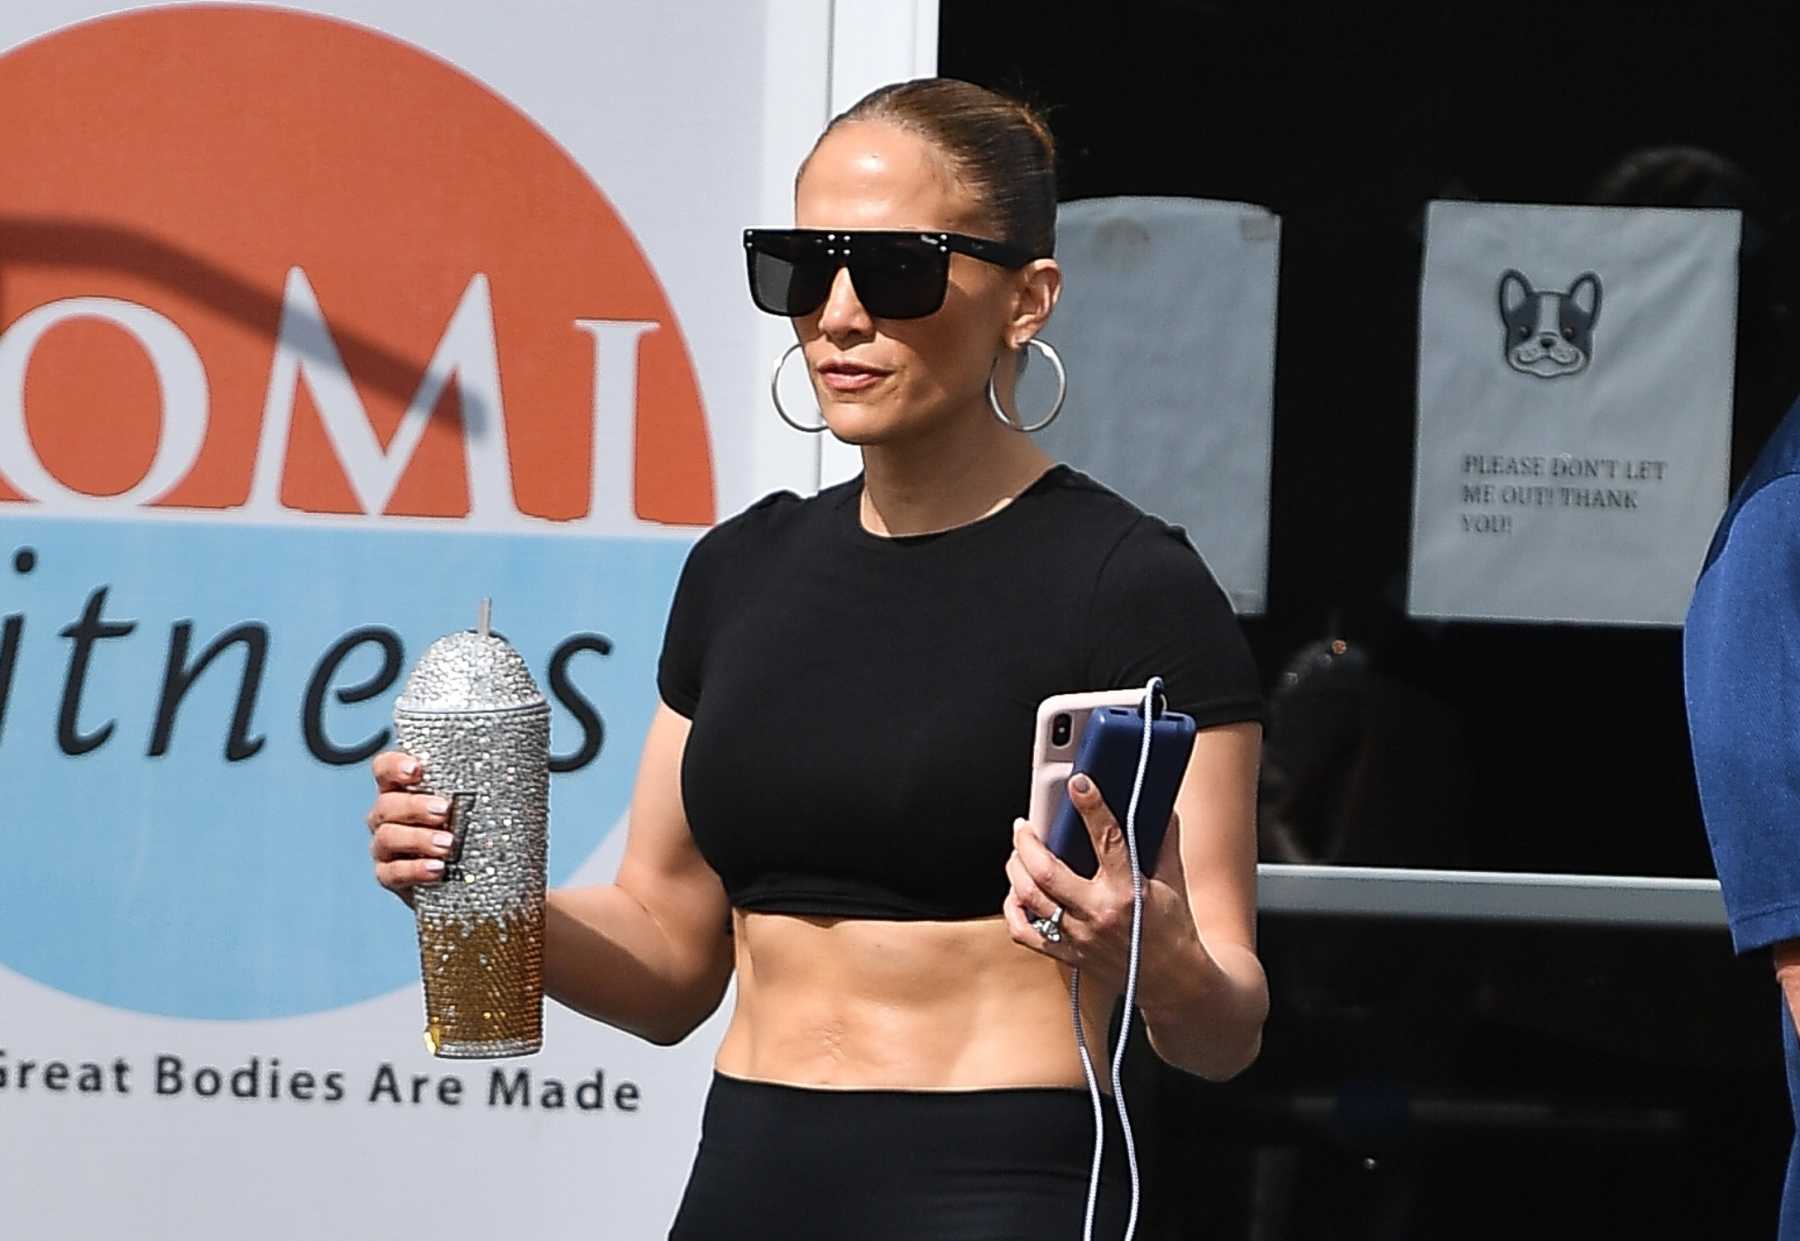 Jennifer Lopez Heads to the Gym in a Sky Blue Monochrome Look and a Birkin